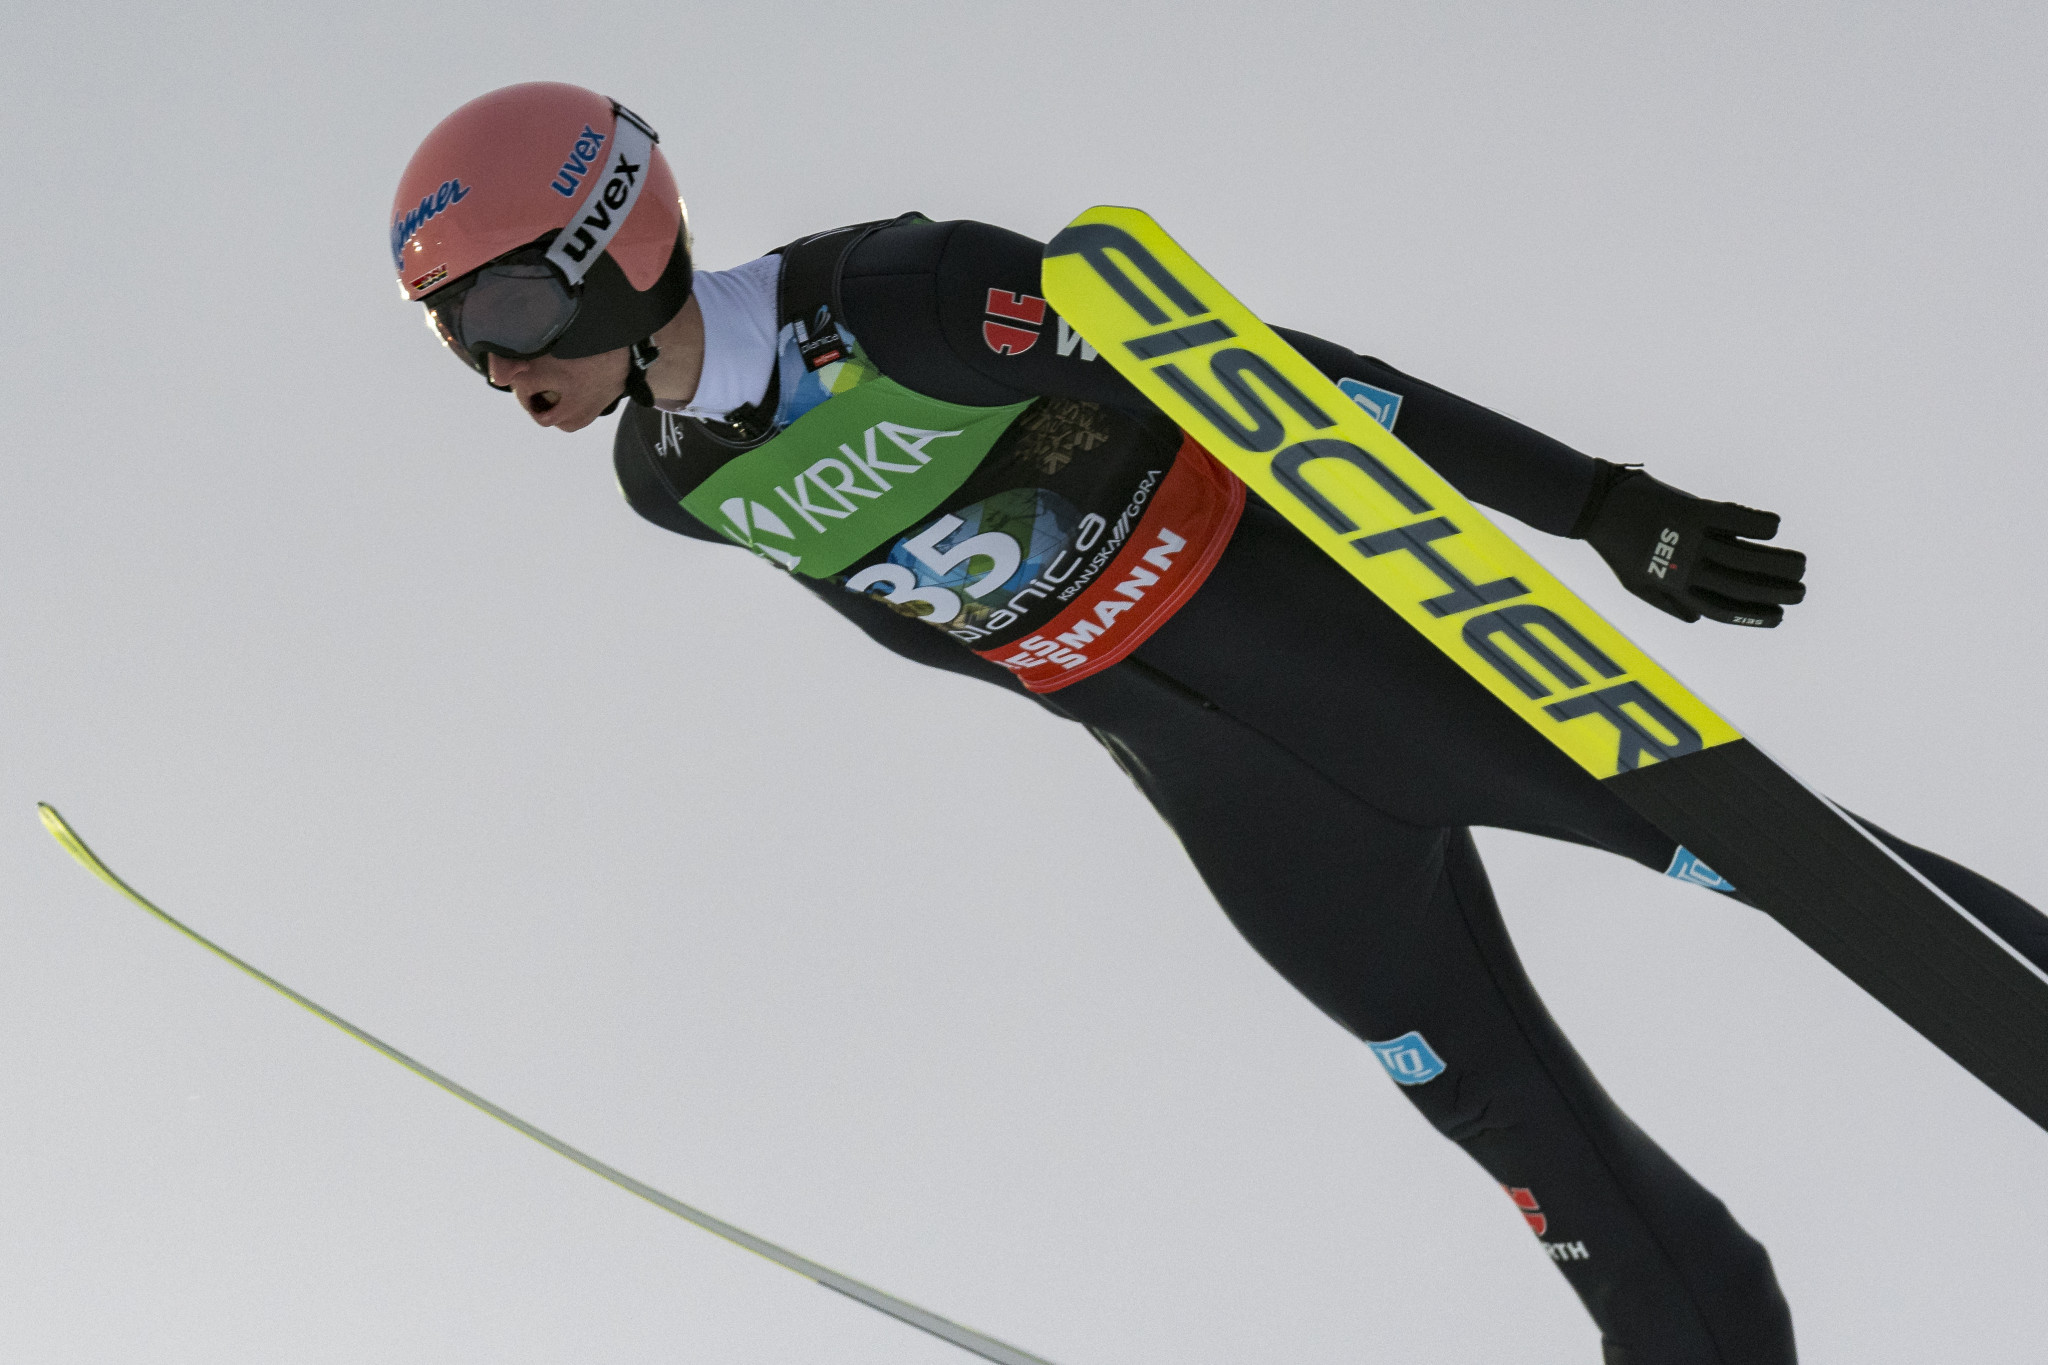 Geiger holds firm to win individual title at FIS Ski Flying World Championships